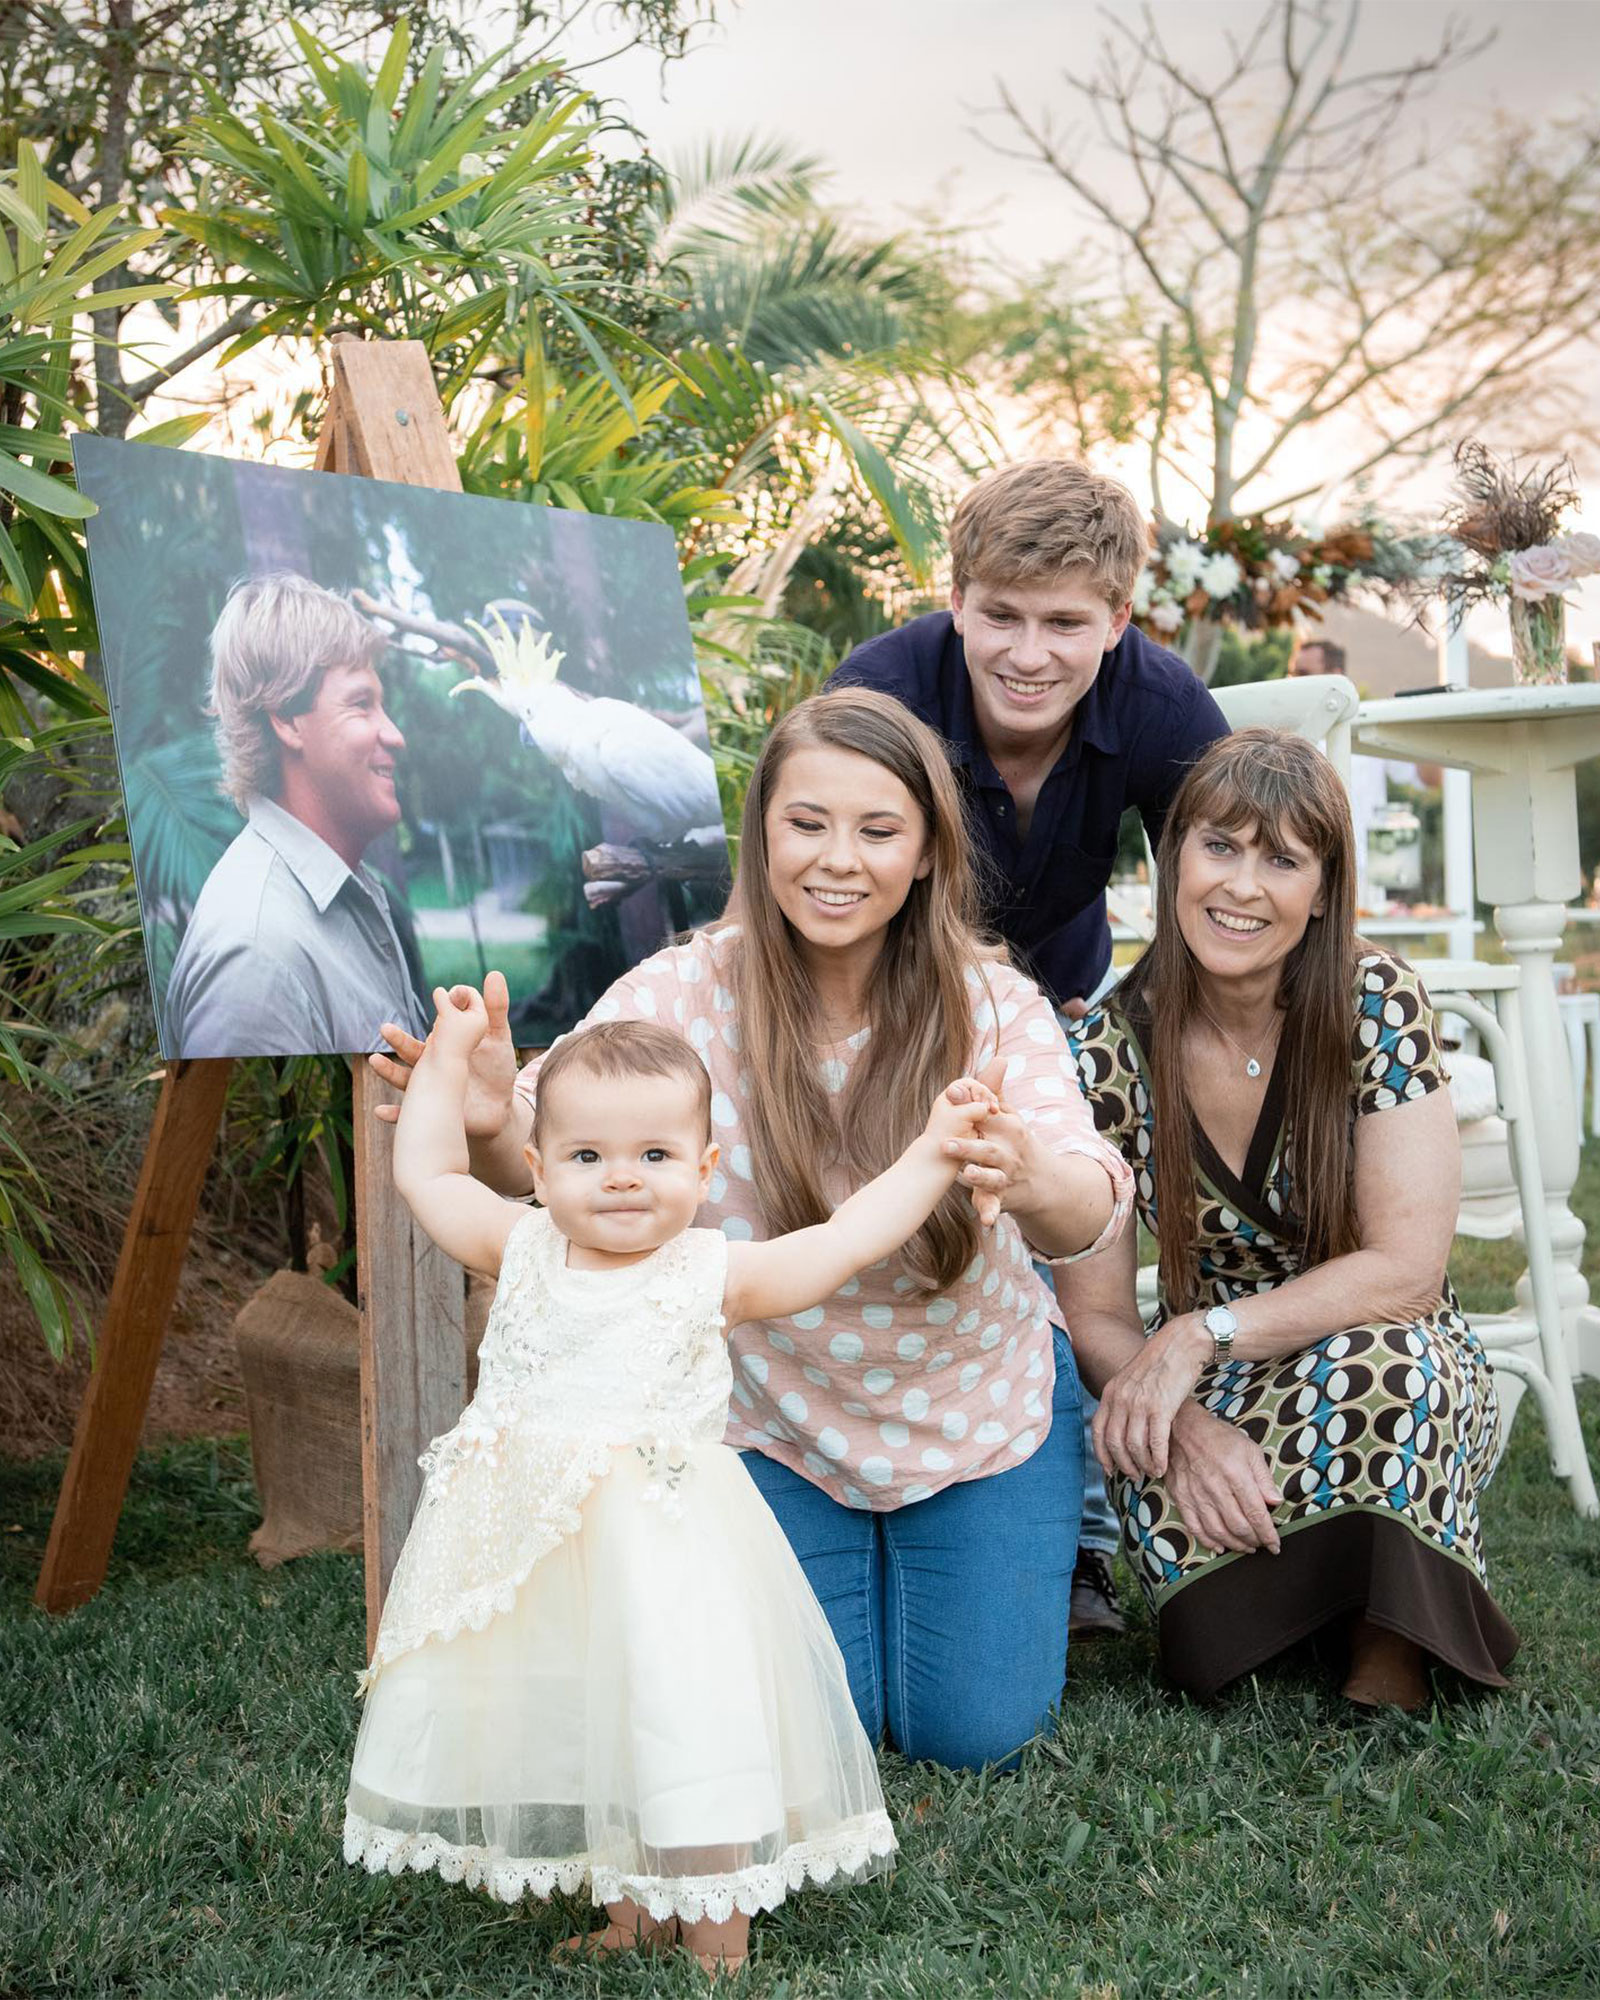 Bindi Irwin and Chandler Powell Celebrate Daughter Grace’s 1st Birthday With Zoo Party